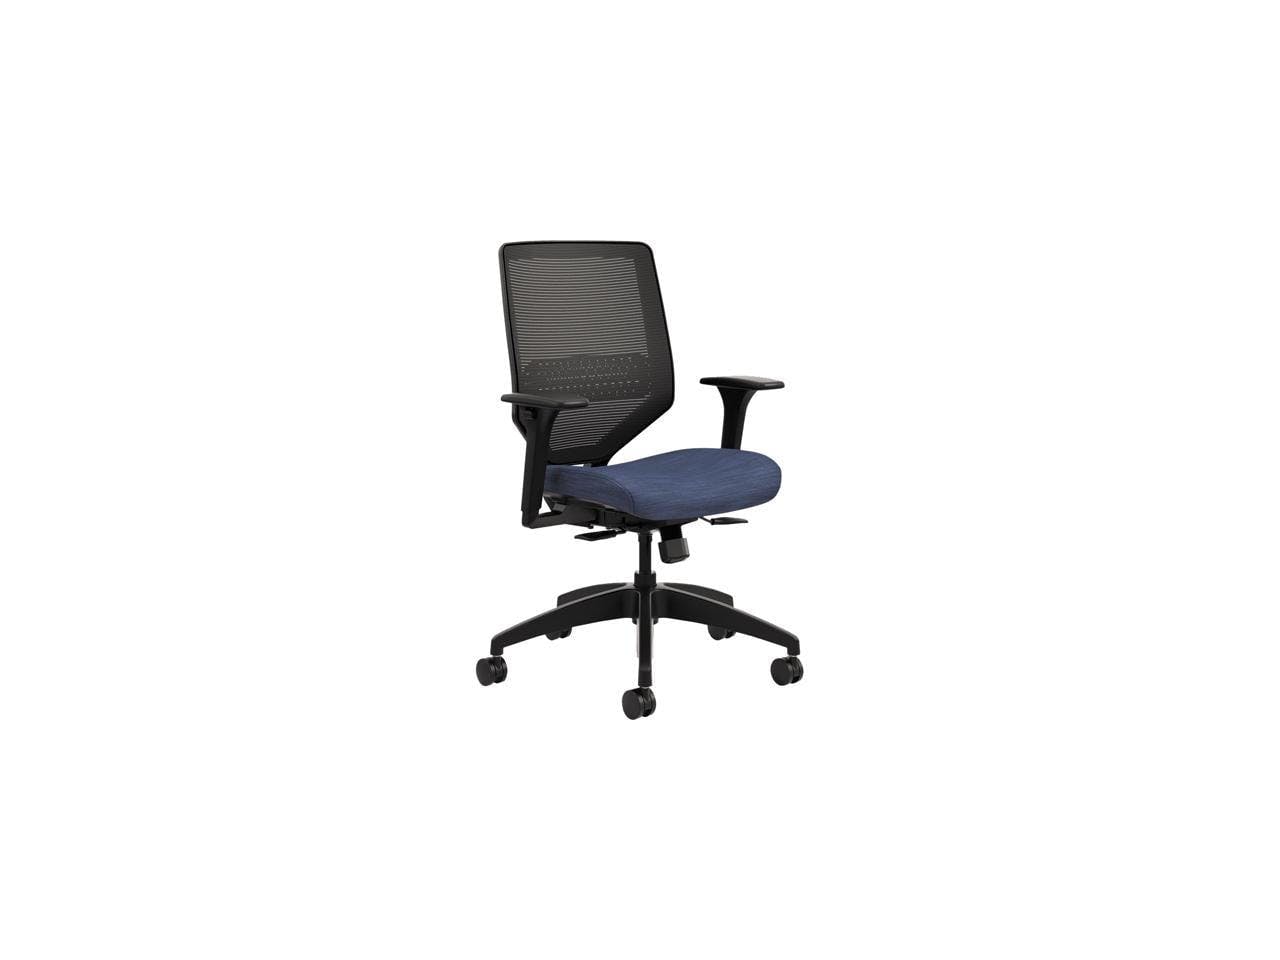 Midnight Swivel Task Chair with Adjustable Mesh Back